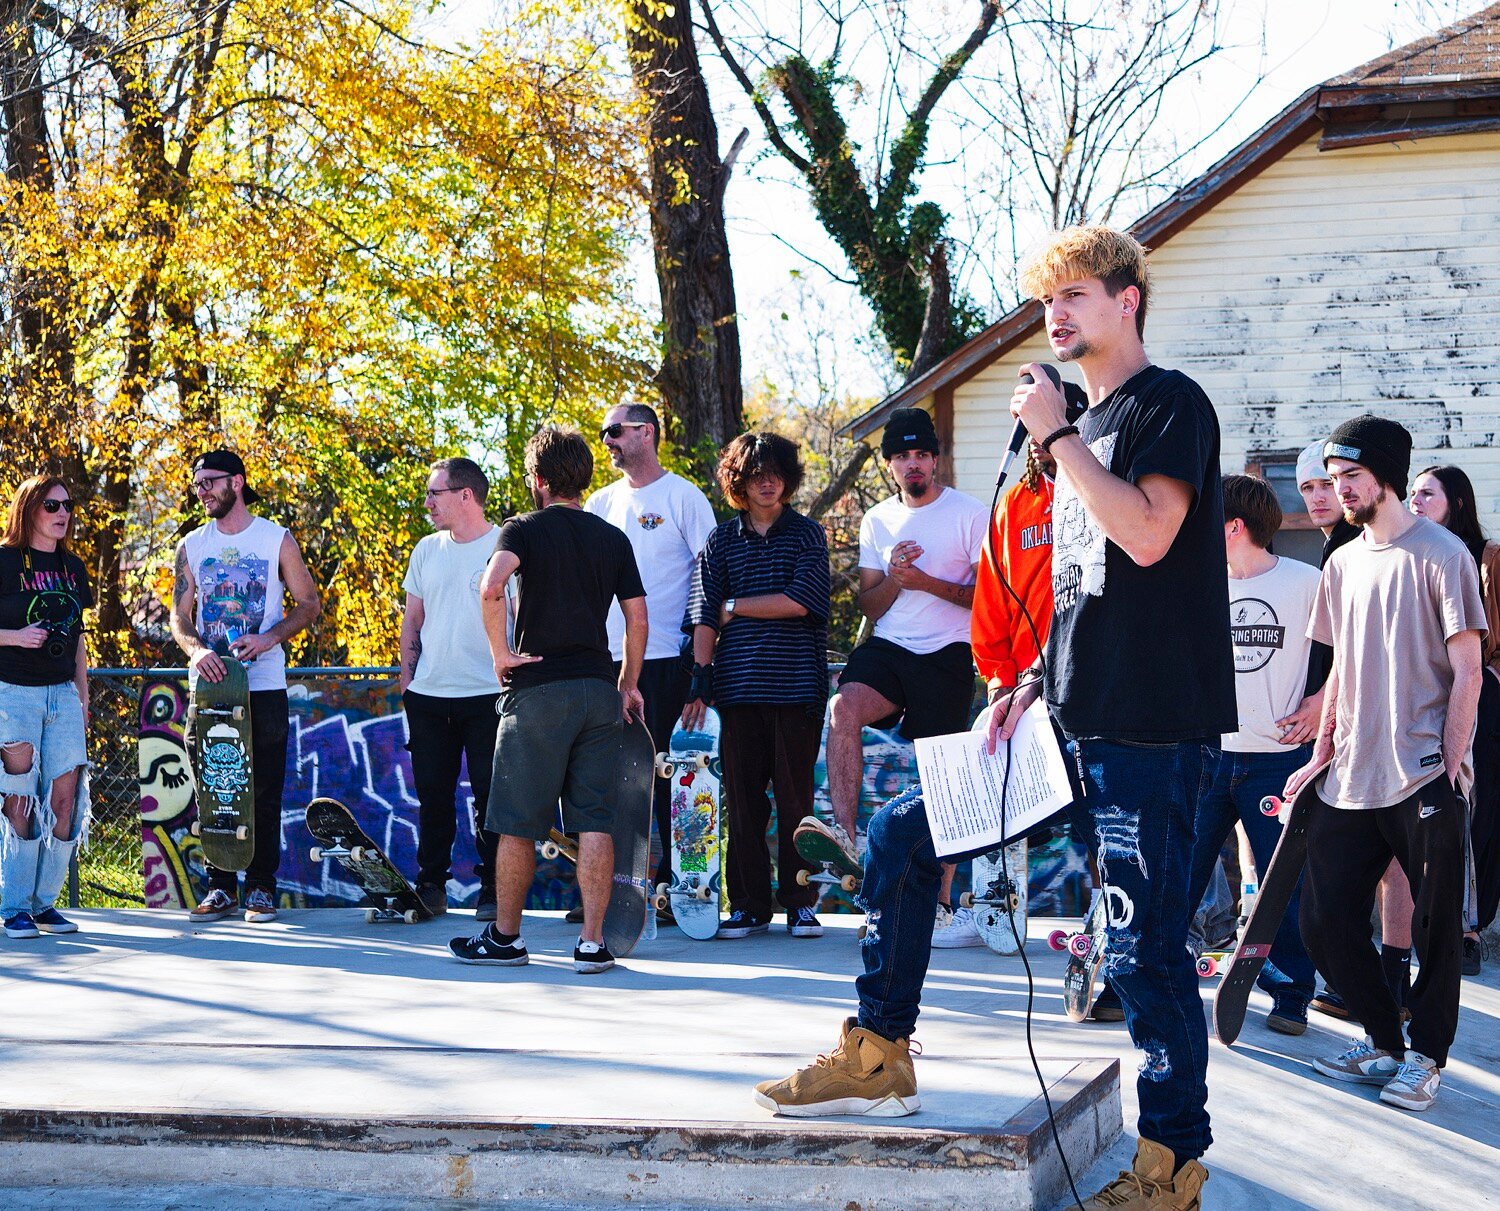 Nathan Witt, flanked by skaters from near and far, addresses the gathered crowd before commemorating the Iron Horse Skate Park with a follow-the-leader run. [see several skate shots]